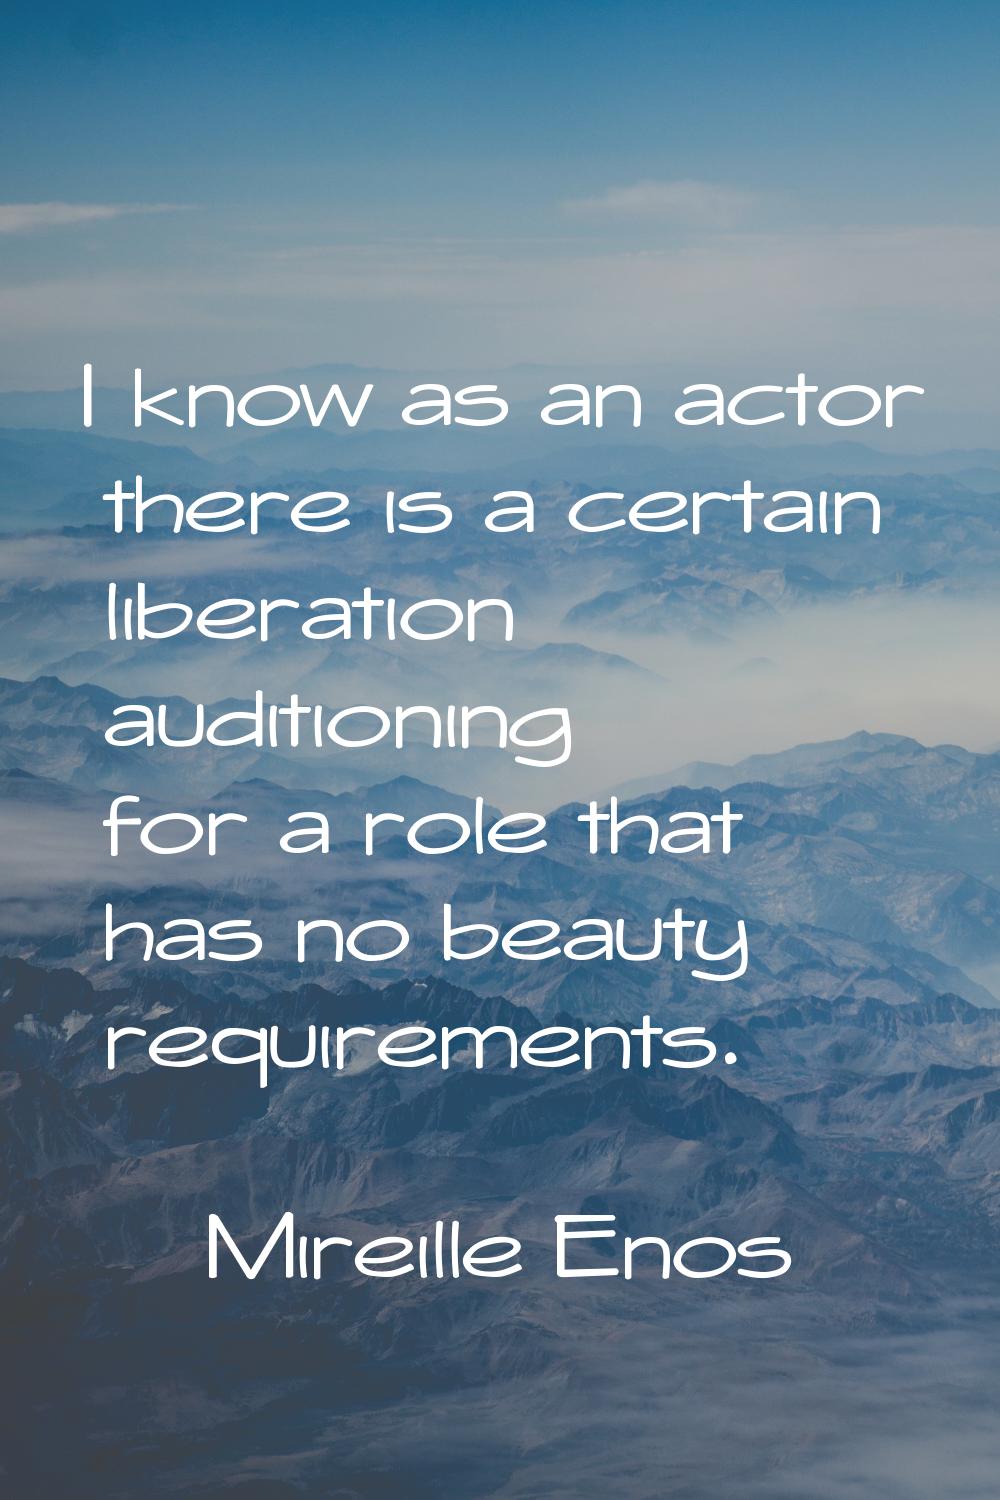 I know as an actor there is a certain liberation auditioning for a role that has no beauty requirem